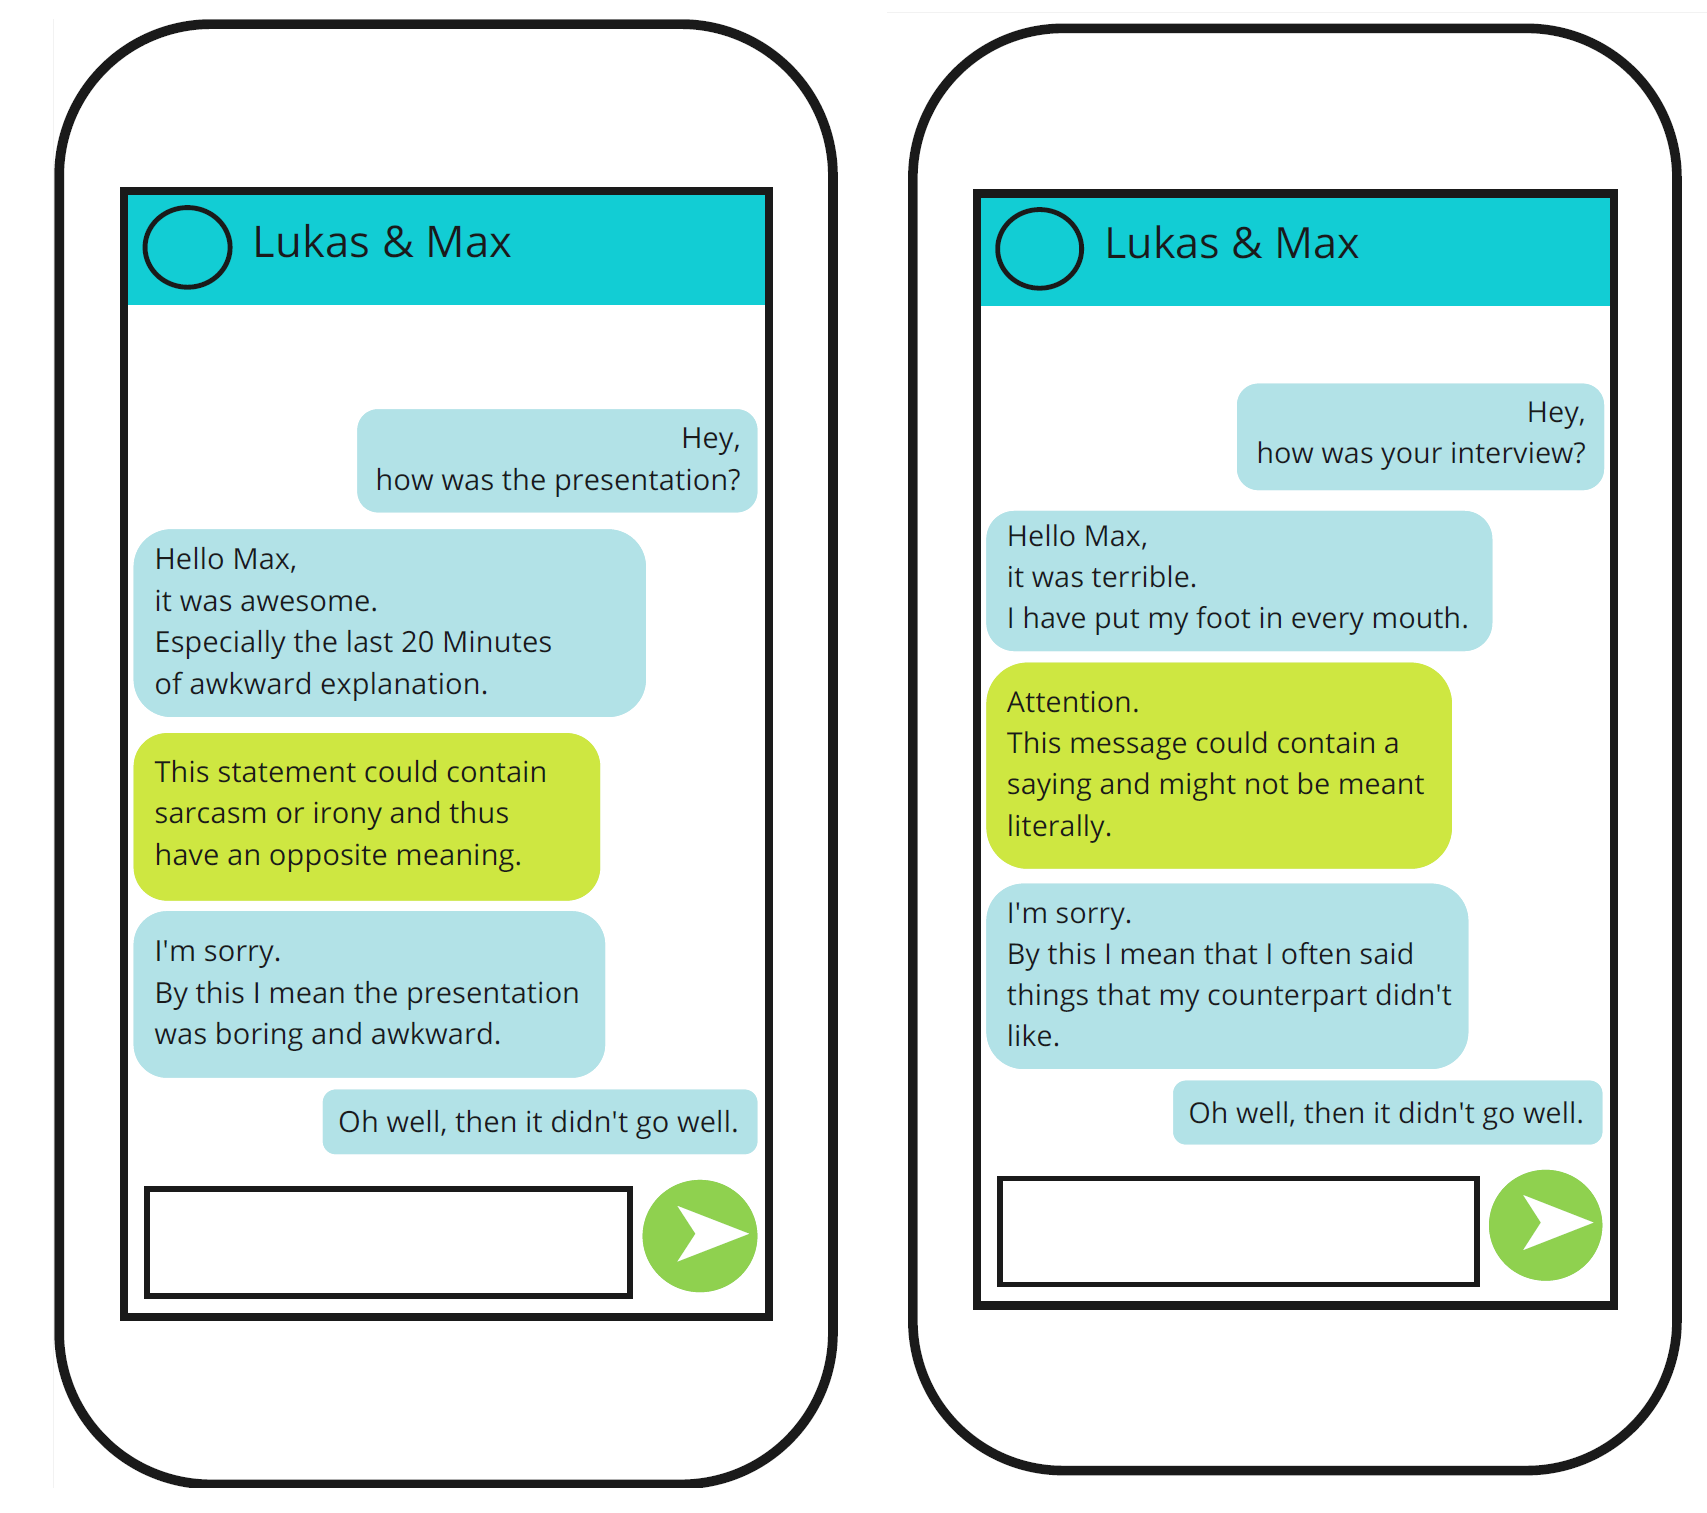 Image of an example scenario in which two people are chatting with each other. One smartphone on the left and one smartphone on the right with different examples each. On the left, the AI recognizes that one person has used irony and marks this for the other person. On the right-hand side of the image, one person uses a proverb and both chat participants are made aware of this.